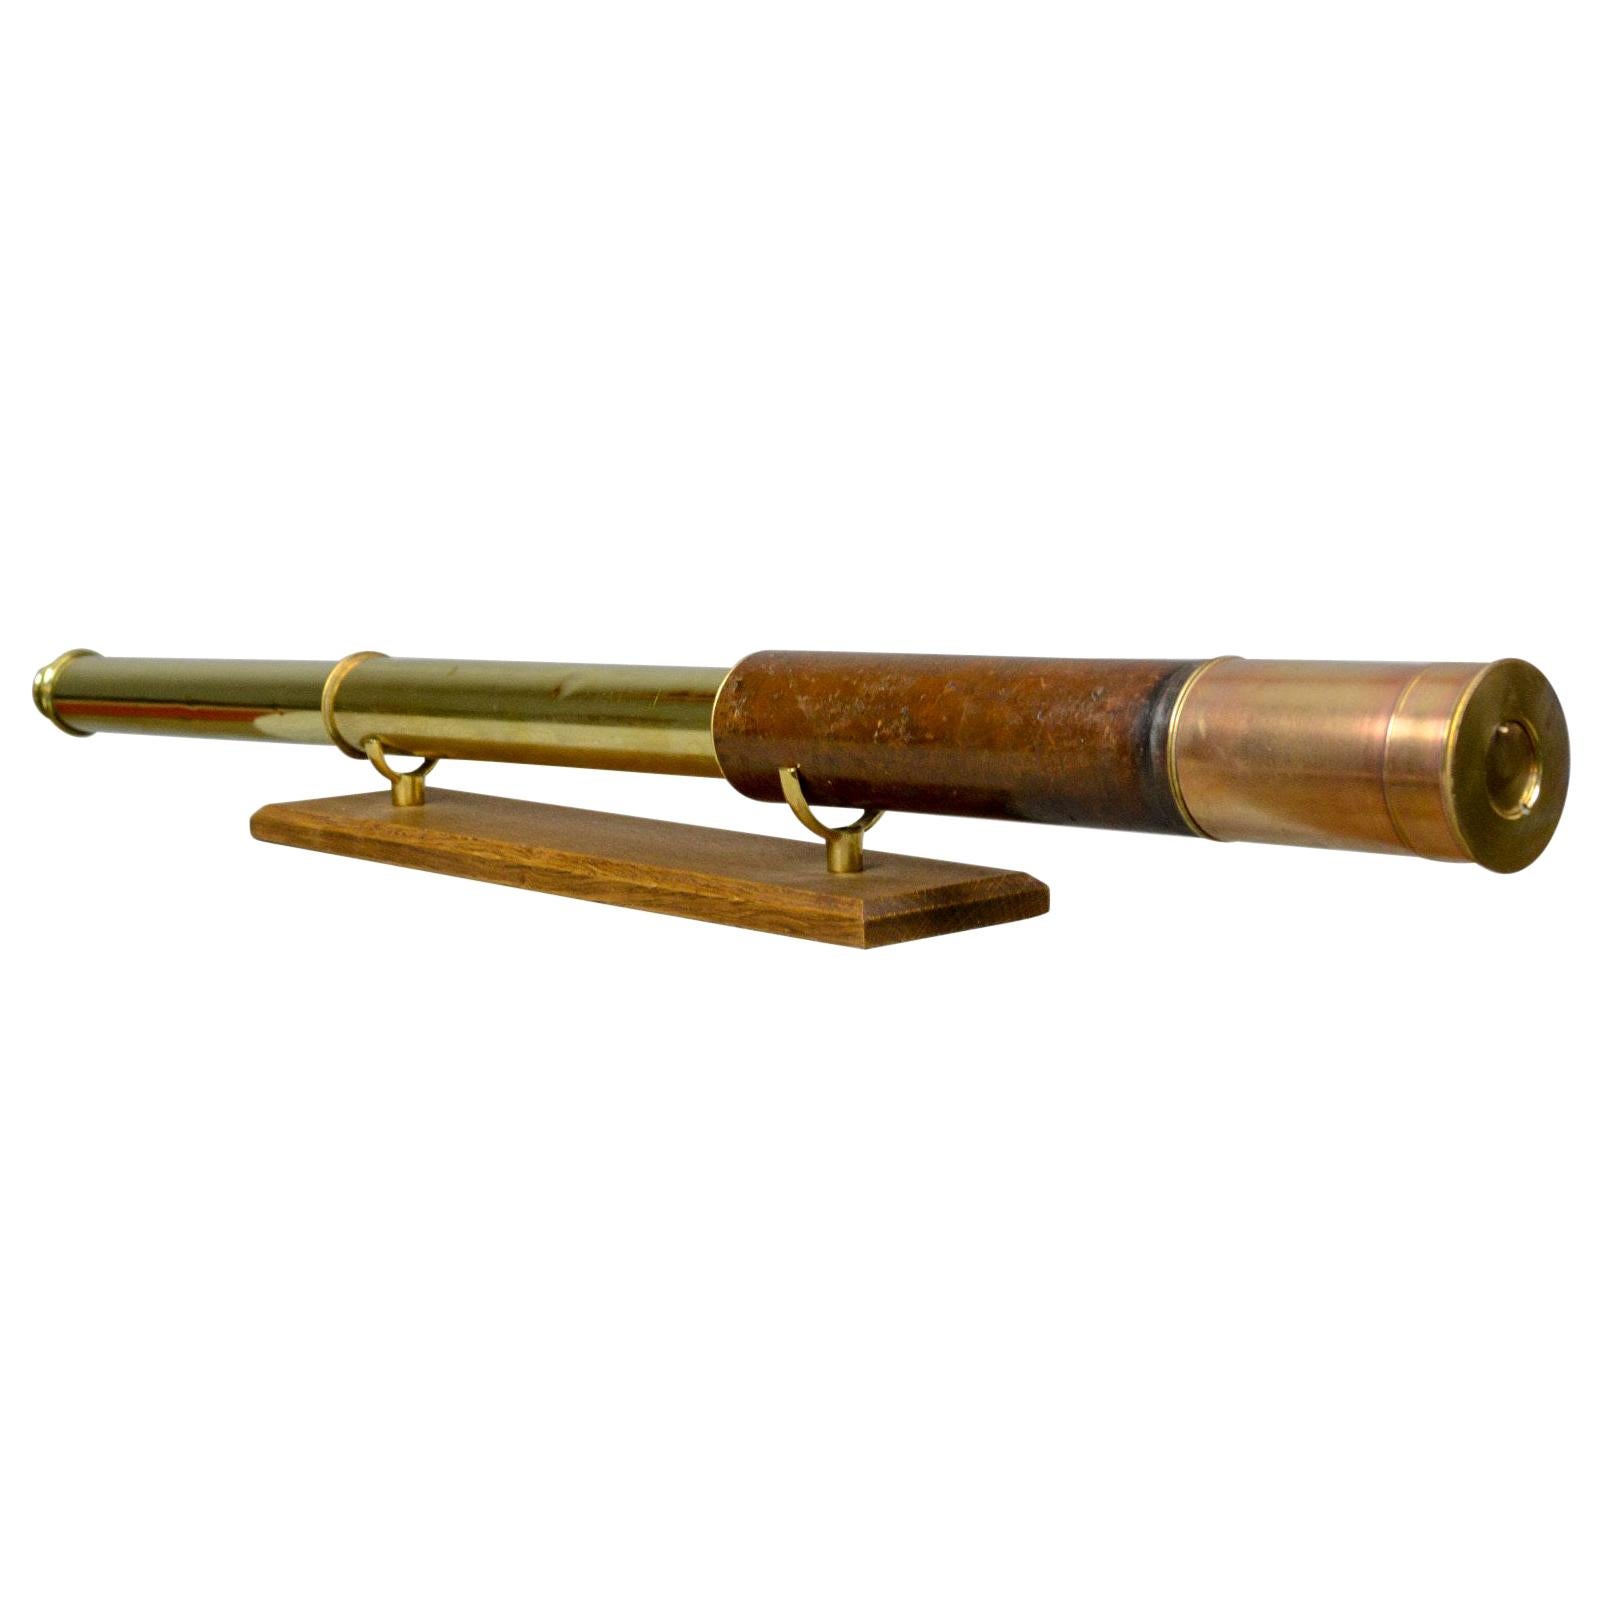 Antique Telescope, Two Draw, Refractor, Stampa and Son, London, circa 1810